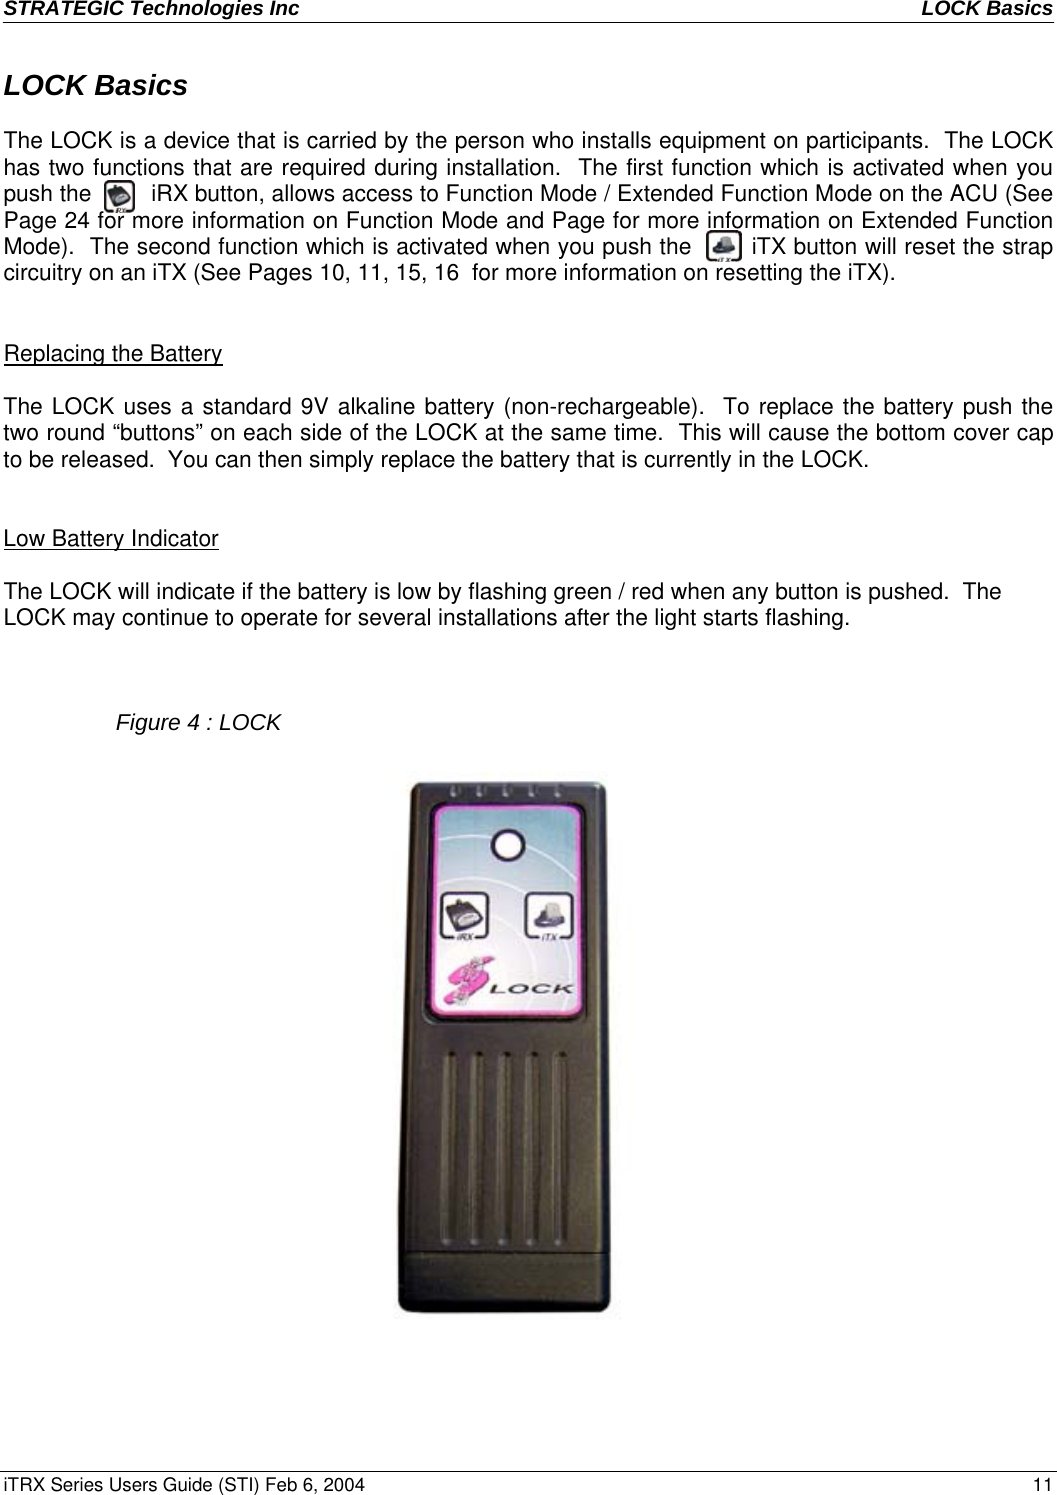 STRATEGIC Technologies Inc  LOCK Basics   iTRX Series Users Guide (STI) Feb 6, 2004  11 LOCK Basics  The LOCK is a device that is carried by the person who installs equipment on participants.  The LOCK has two functions that are required during installation.  The first function which is activated when you push the         iRX button, allows access to Function Mode / Extended Function Mode on the ACU (See Page 24 for more information on Function Mode and Page for more information on Extended Function Mode).  The second function which is activated when you push the        iTX button will reset the strap circuitry on an iTX (See Pages 10, 11, 15, 16  for more information on resetting the iTX).             Replacing the Battery   The LOCK uses a standard 9V alkaline battery (non-rechargeable).  To replace the battery push the two round “buttons” on each side of the LOCK at the same time.  This will cause the bottom cover cap to be released.  You can then simply replace the battery that is currently in the LOCK.   Low Battery Indicator  The LOCK will indicate if the battery is low by flashing green / red when any button is pushed.  The LOCK may continue to operate for several installations after the light starts flashing.      Figure 4 : LOCK  